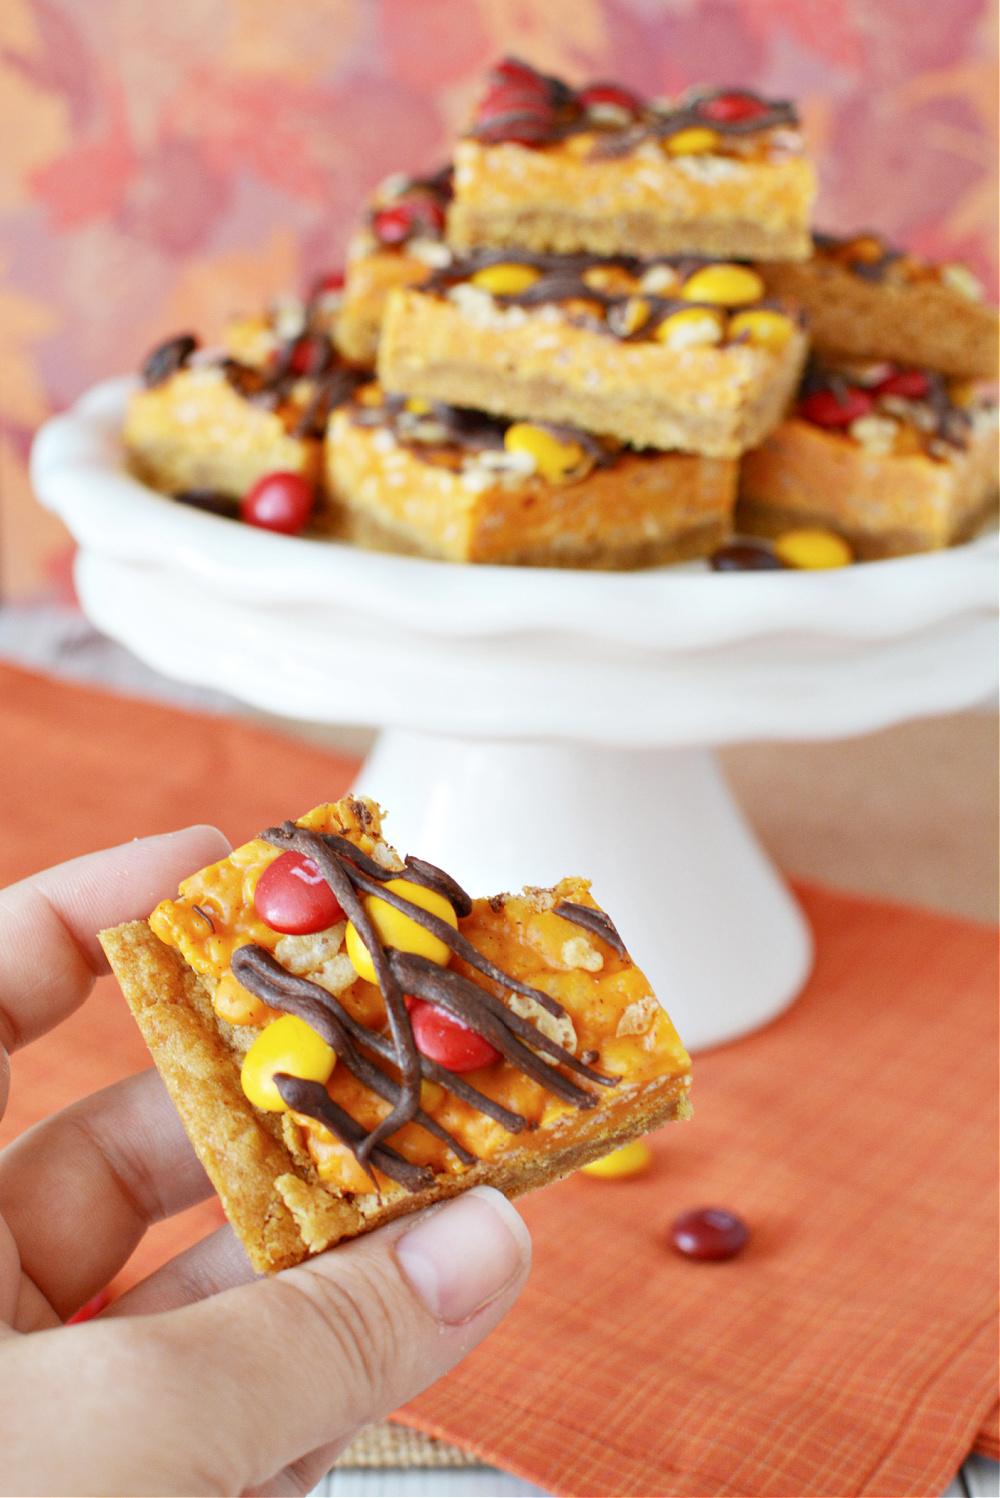 Pumpkin bars filled with spice, chocolate candies, and drizzled with chocolate